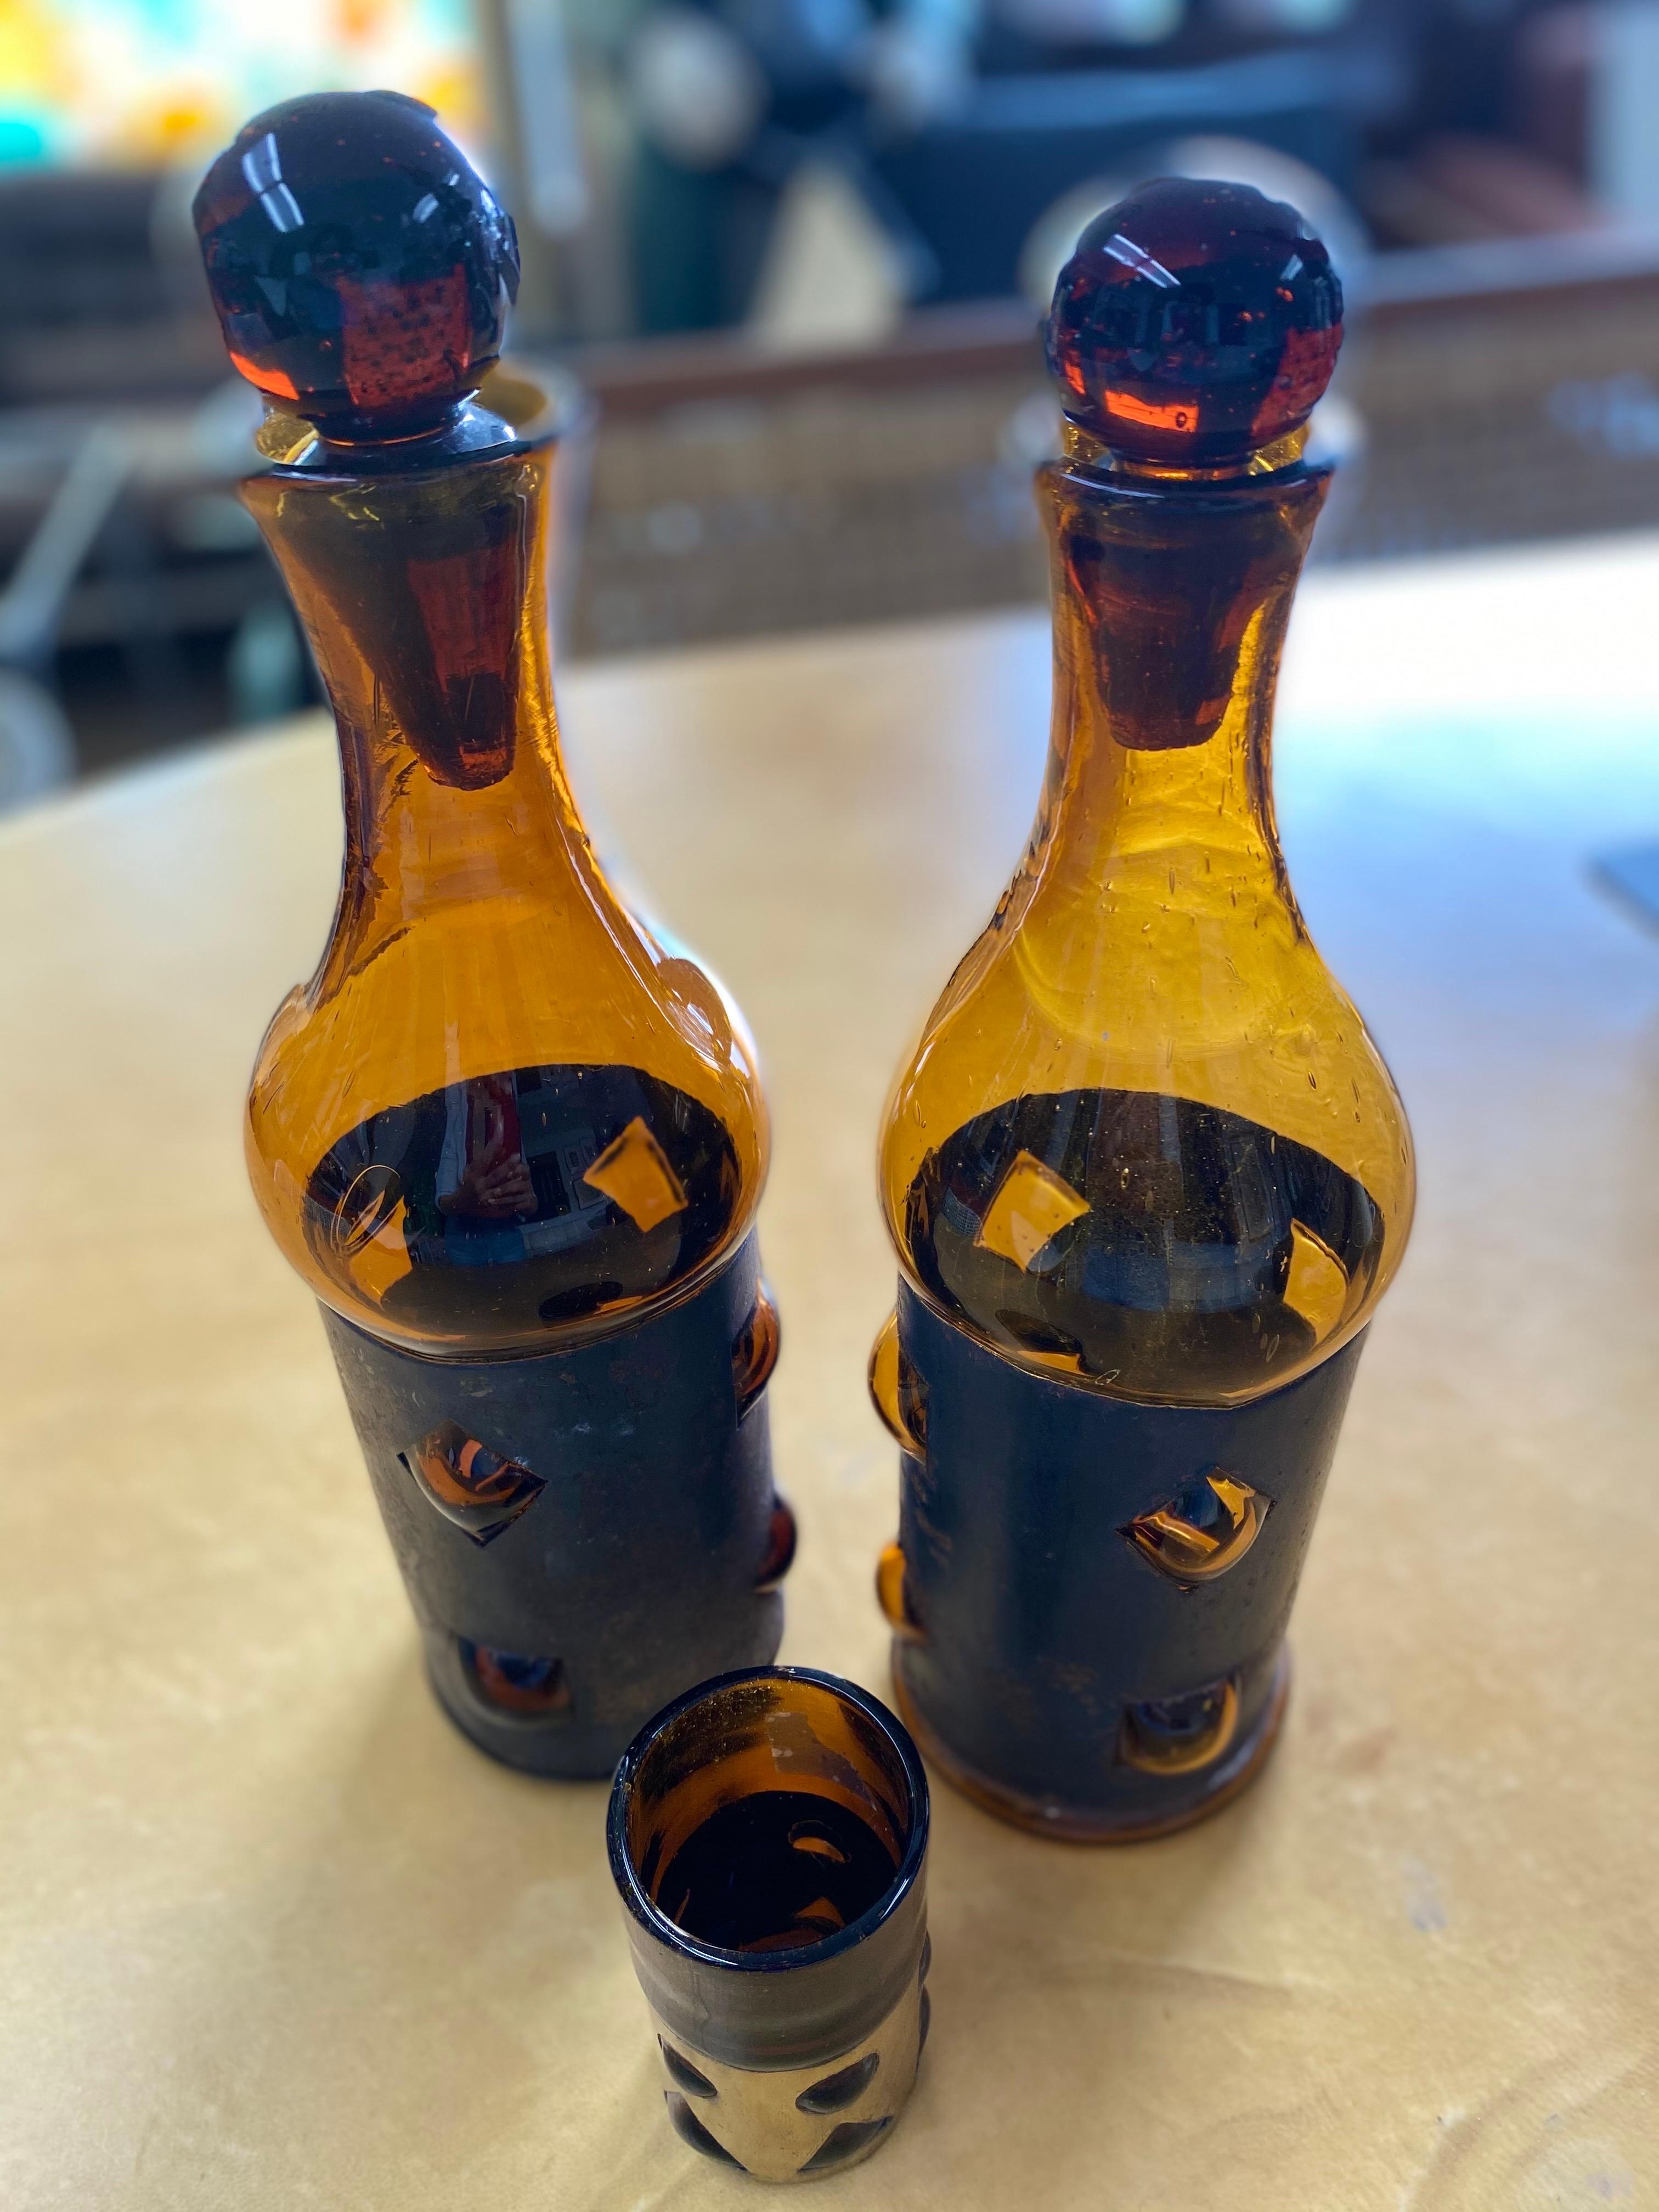 Brutalist Mexican modern imprisoned glass decanters with glass stoppers and one drinking glass by Felipe Delfinger (Derflingher) for Feders. Hand-blown glass with a beautifully patinated brass encasement, Mexico, circa 1960s. Felipe Delfinger was